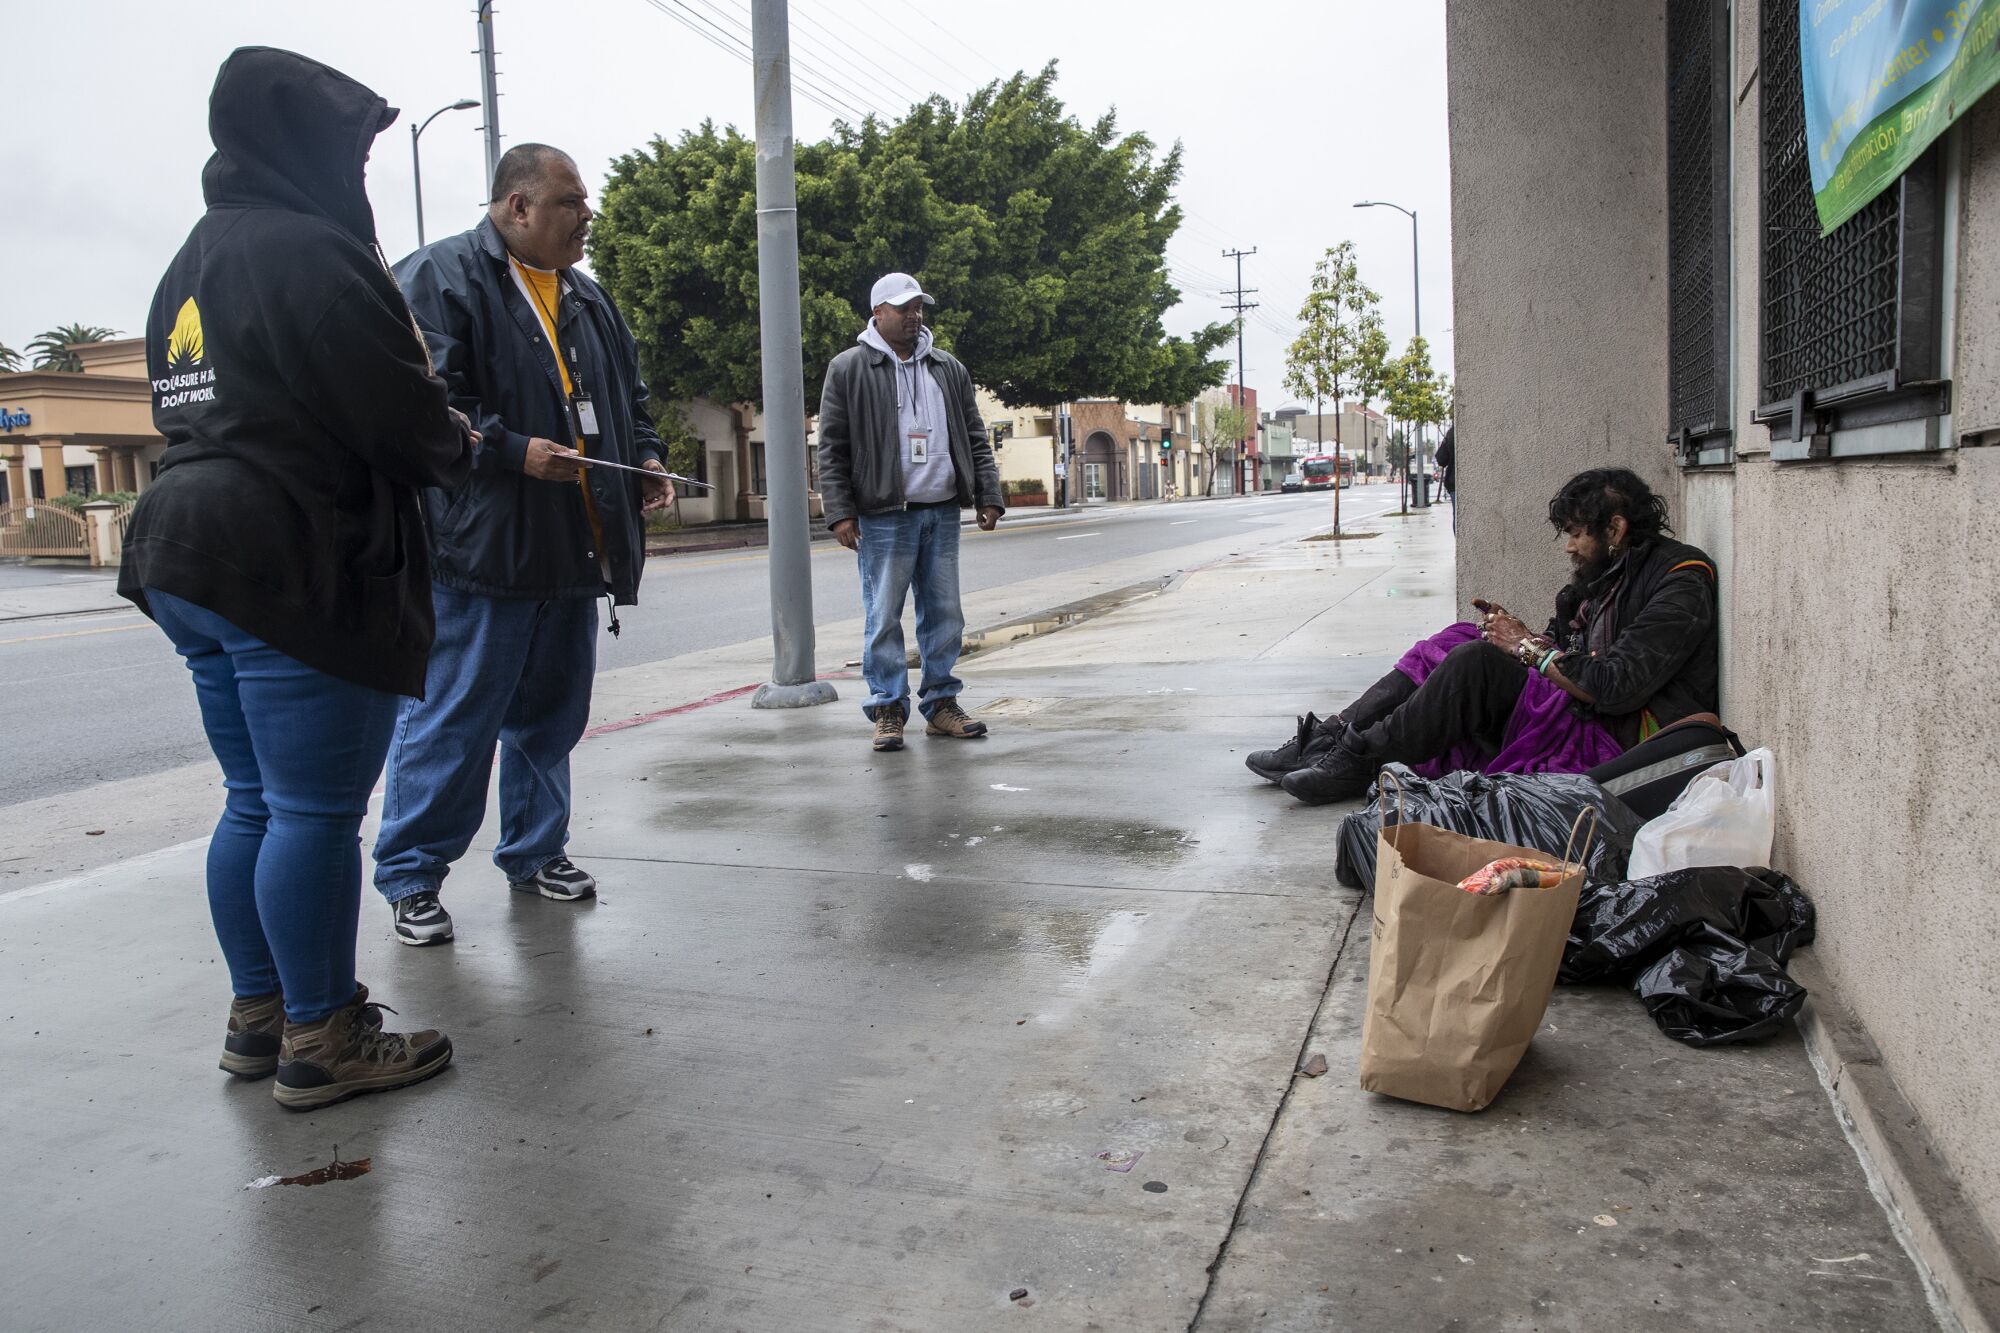 HOPICS outreach nurse Kenya Smith, right, Ralph Gomez, center, and Kat Johnson, left, leave a bag of food for Davis Soto, taking care to stay at least six feet away from him. The coronavirus pandemic has led to a list of new precautions that outreach workers must follow.